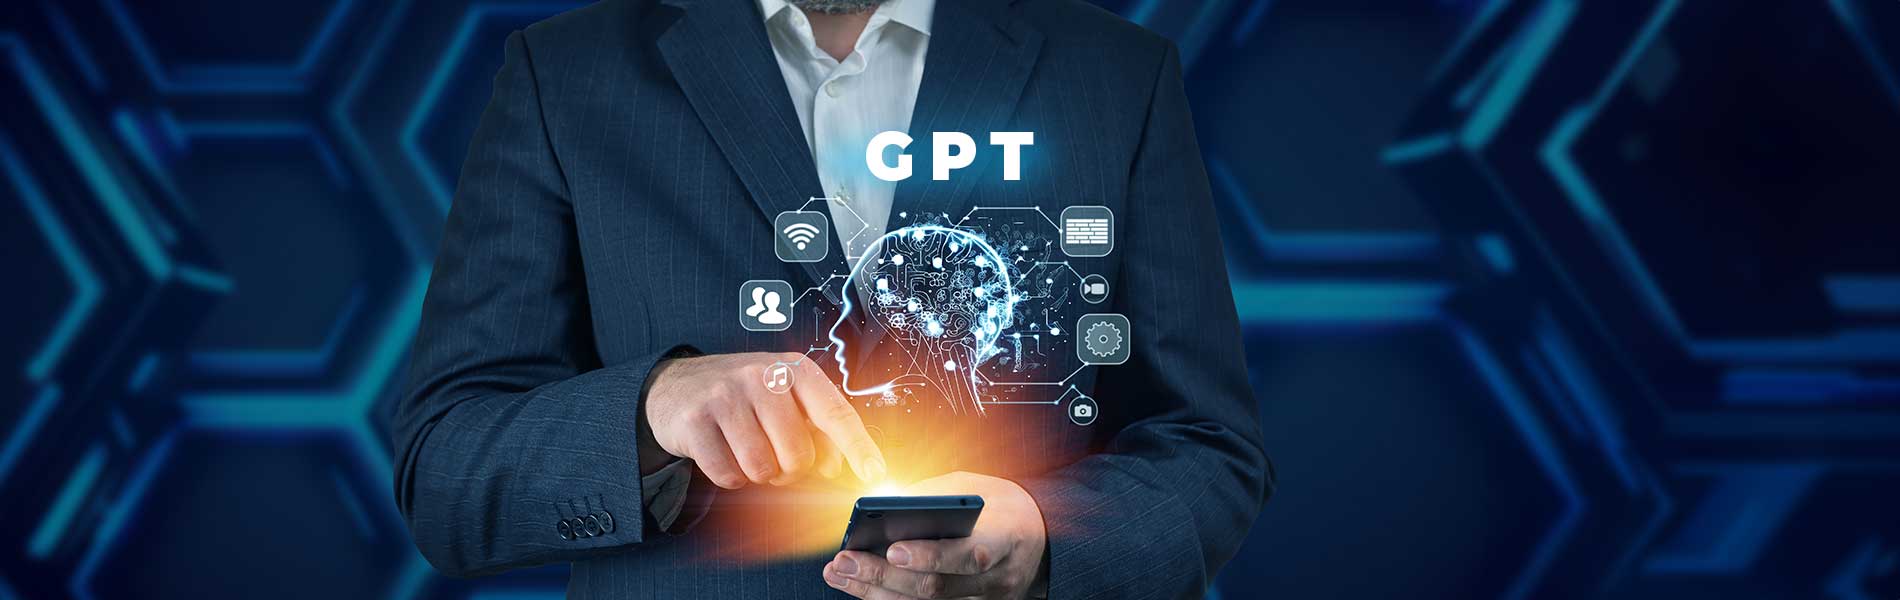 How Is GPT Revolutionizing Communication Today